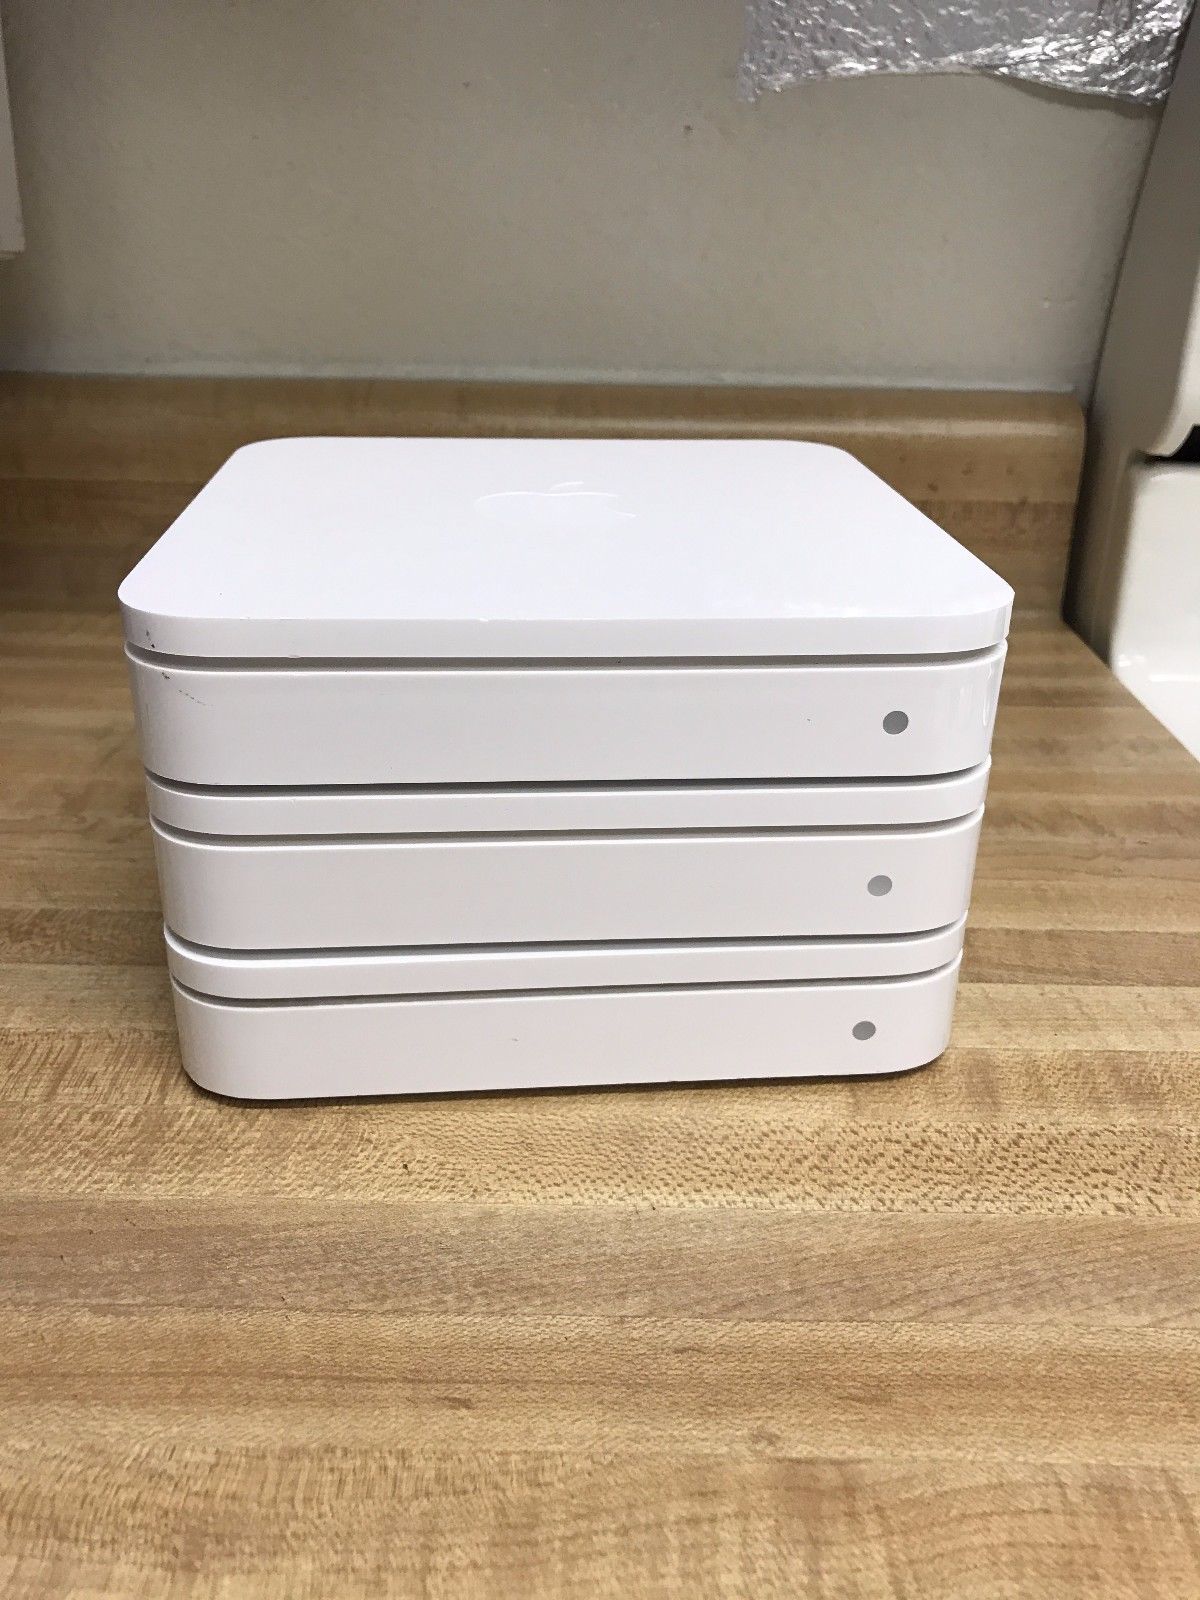 apple airport extreme a1408 printer